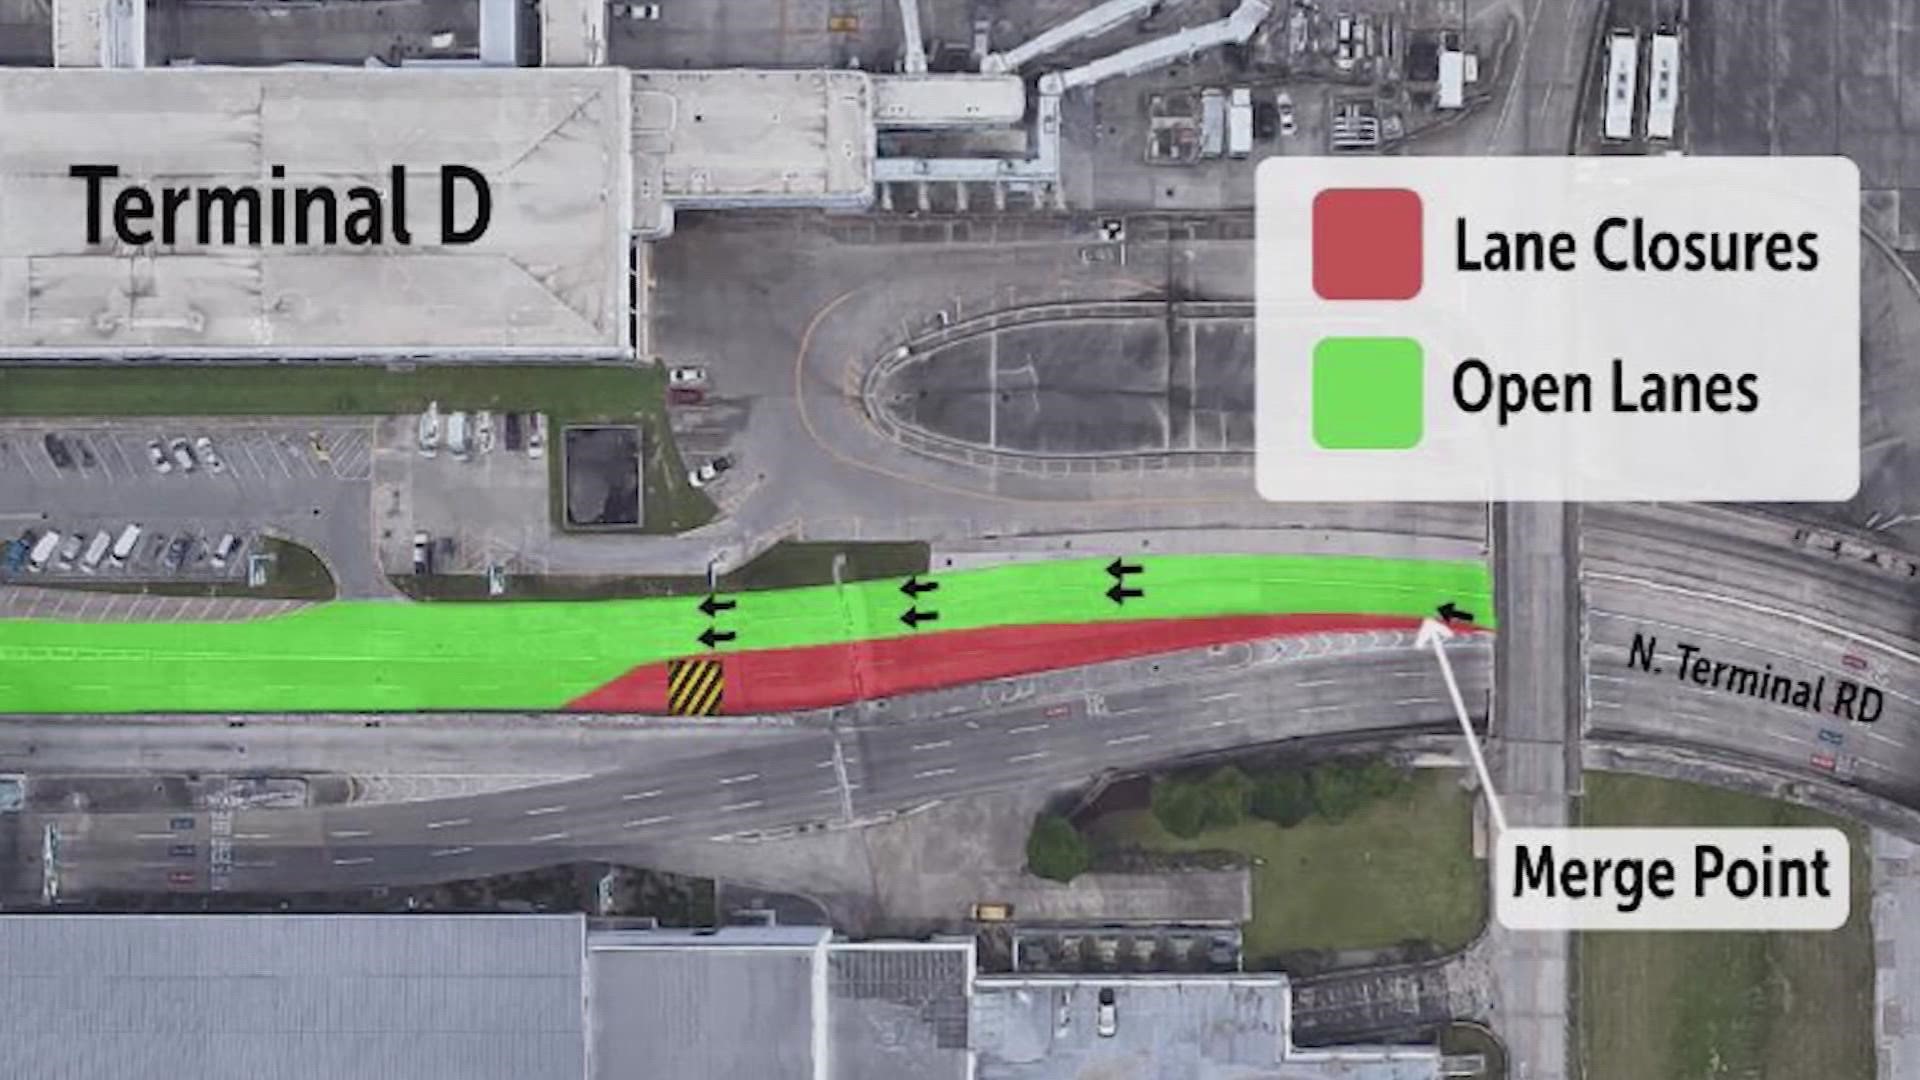 Temporary lane closures could cause more traffic at Terminals C, D and E.